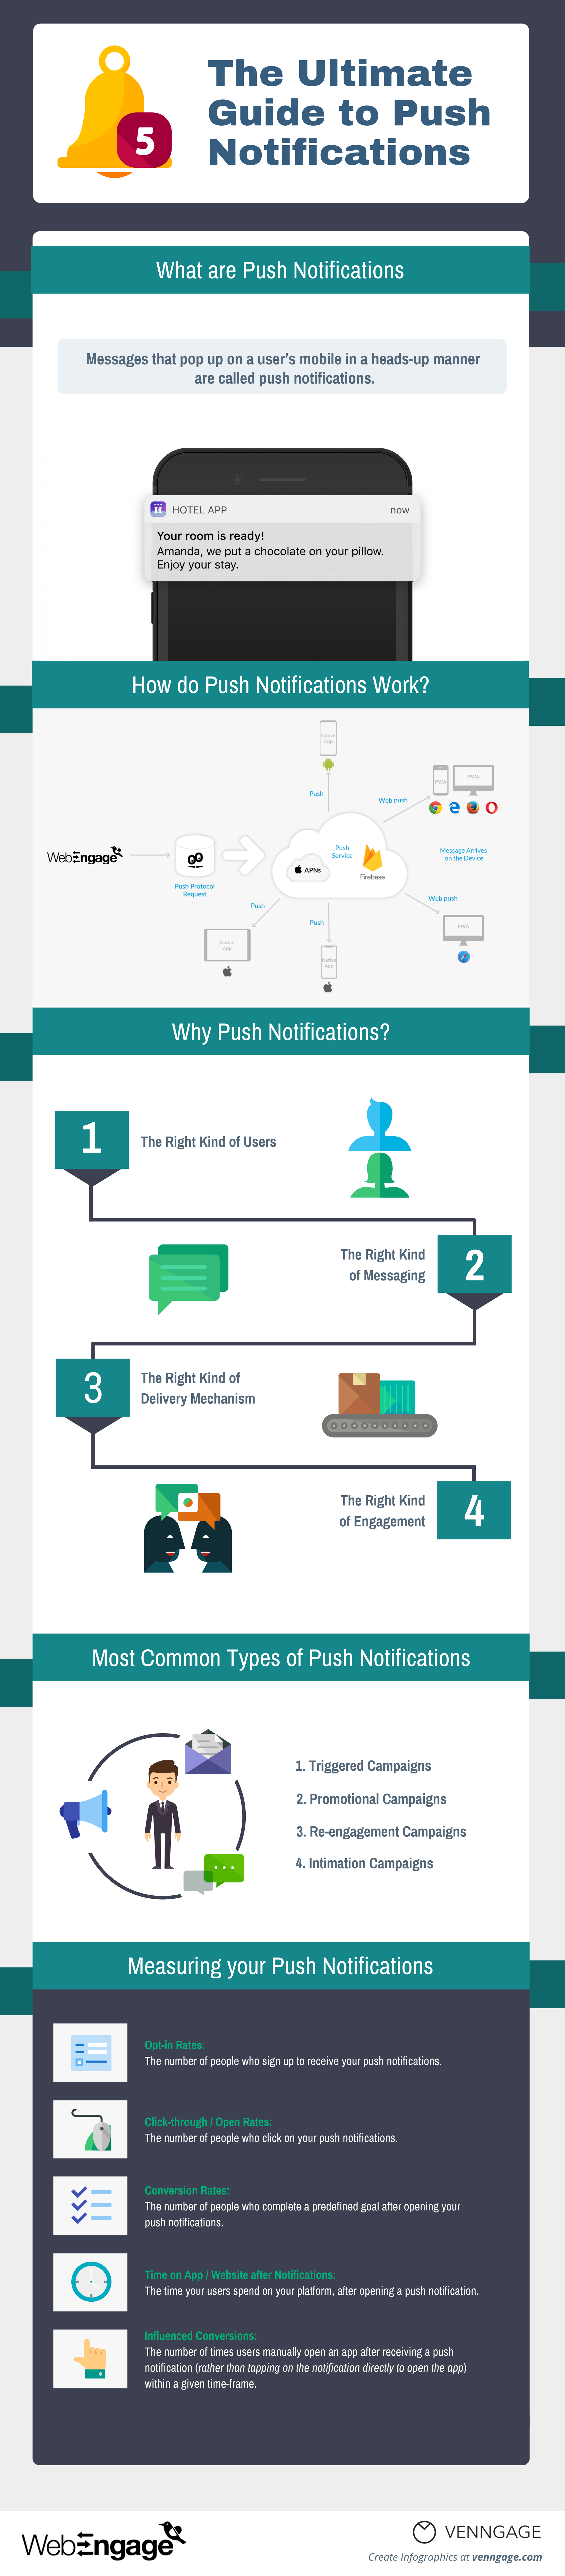 The Ultimate Guide to Push Notifications by WebEngage